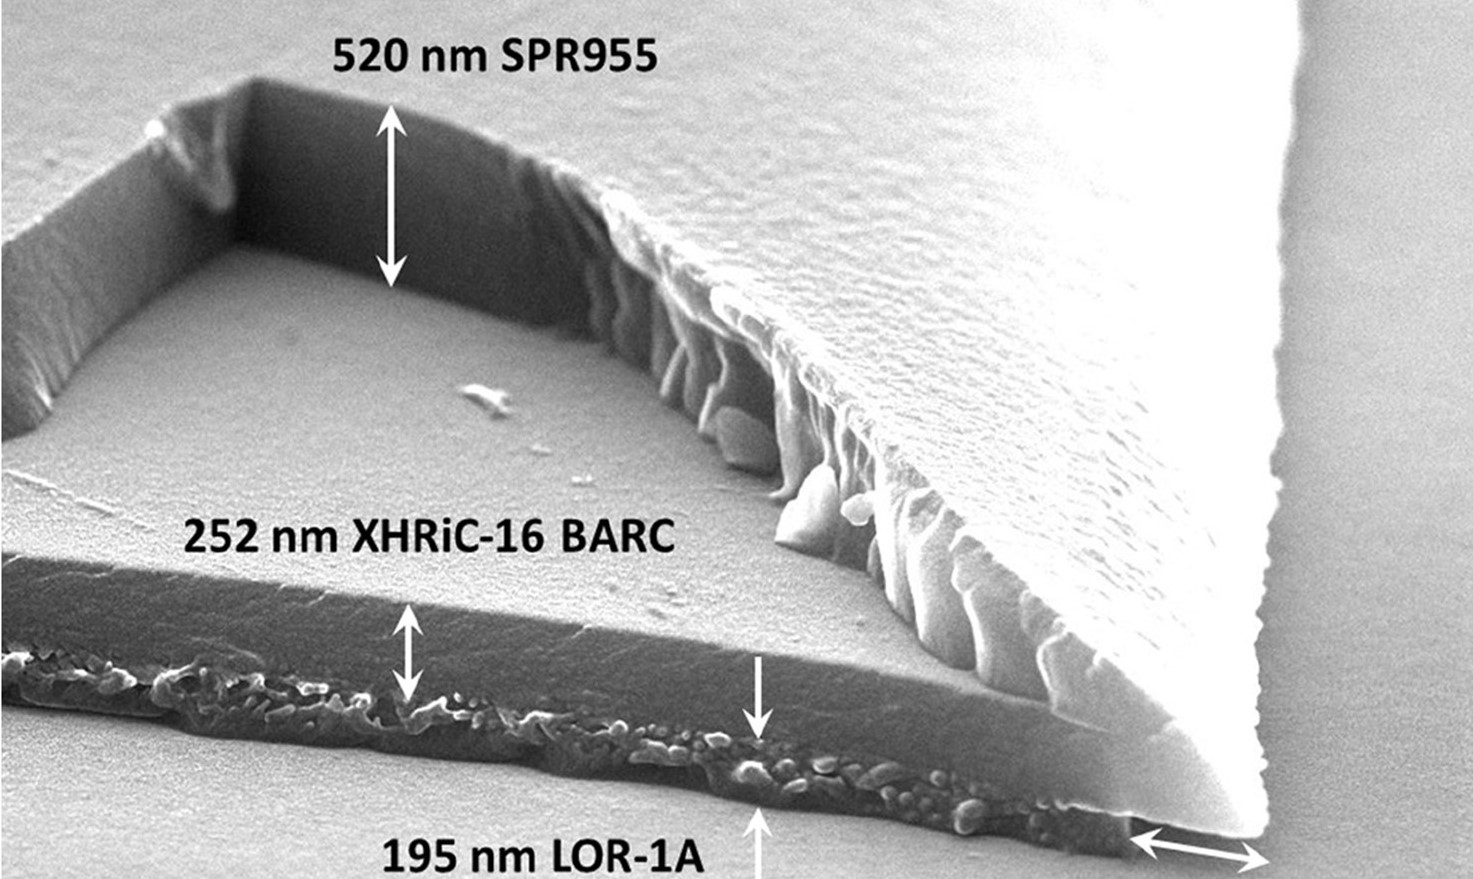 Image of a tri-layer photolithography stack with a flake broken off revealing its thickness